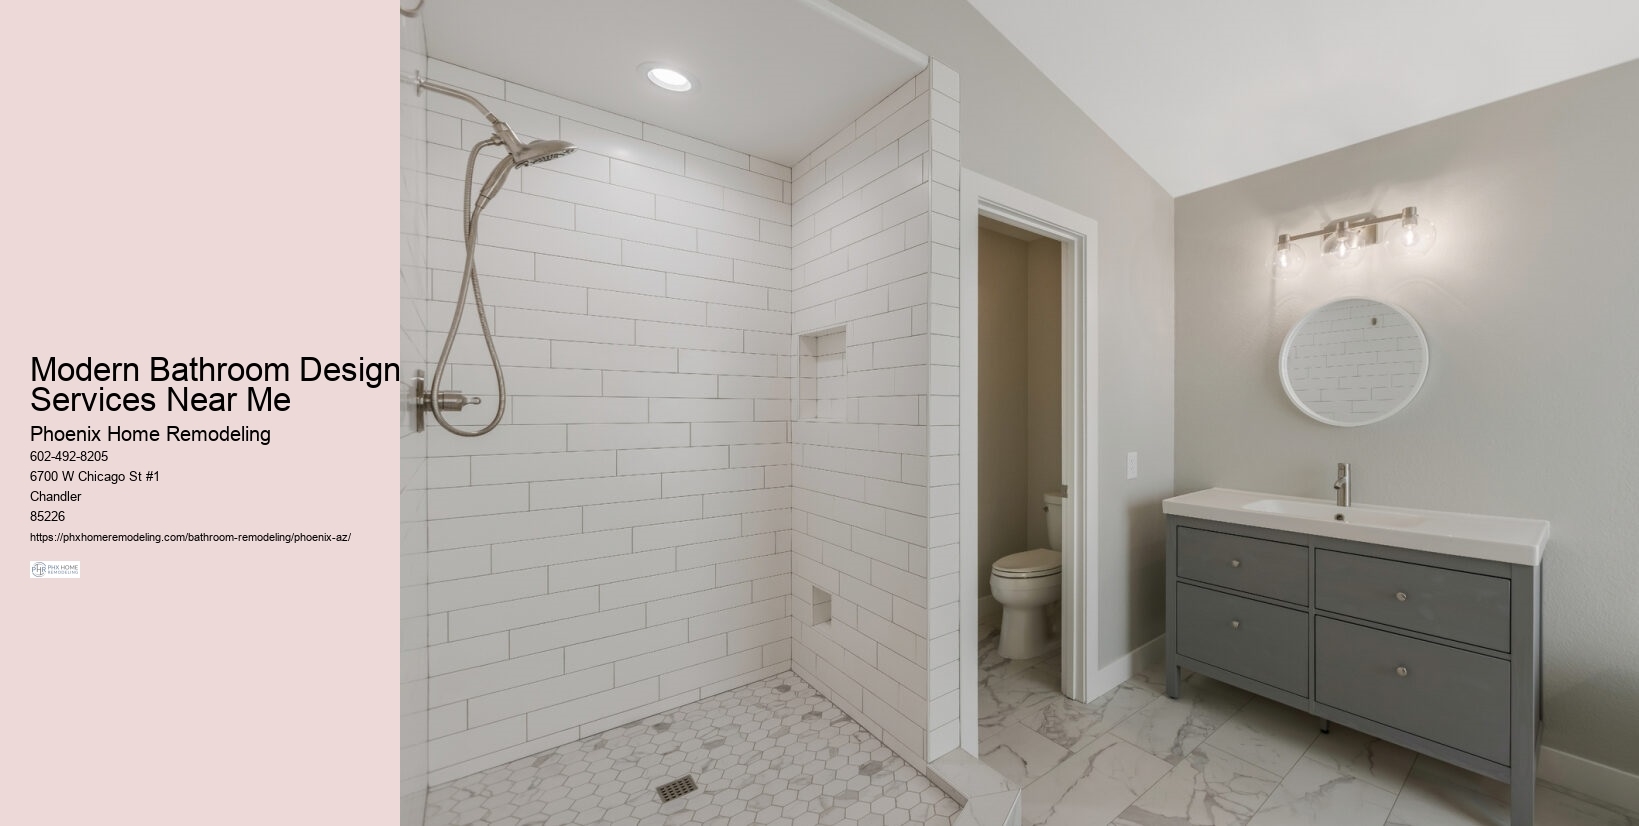 What are the three types of bathroom layouts